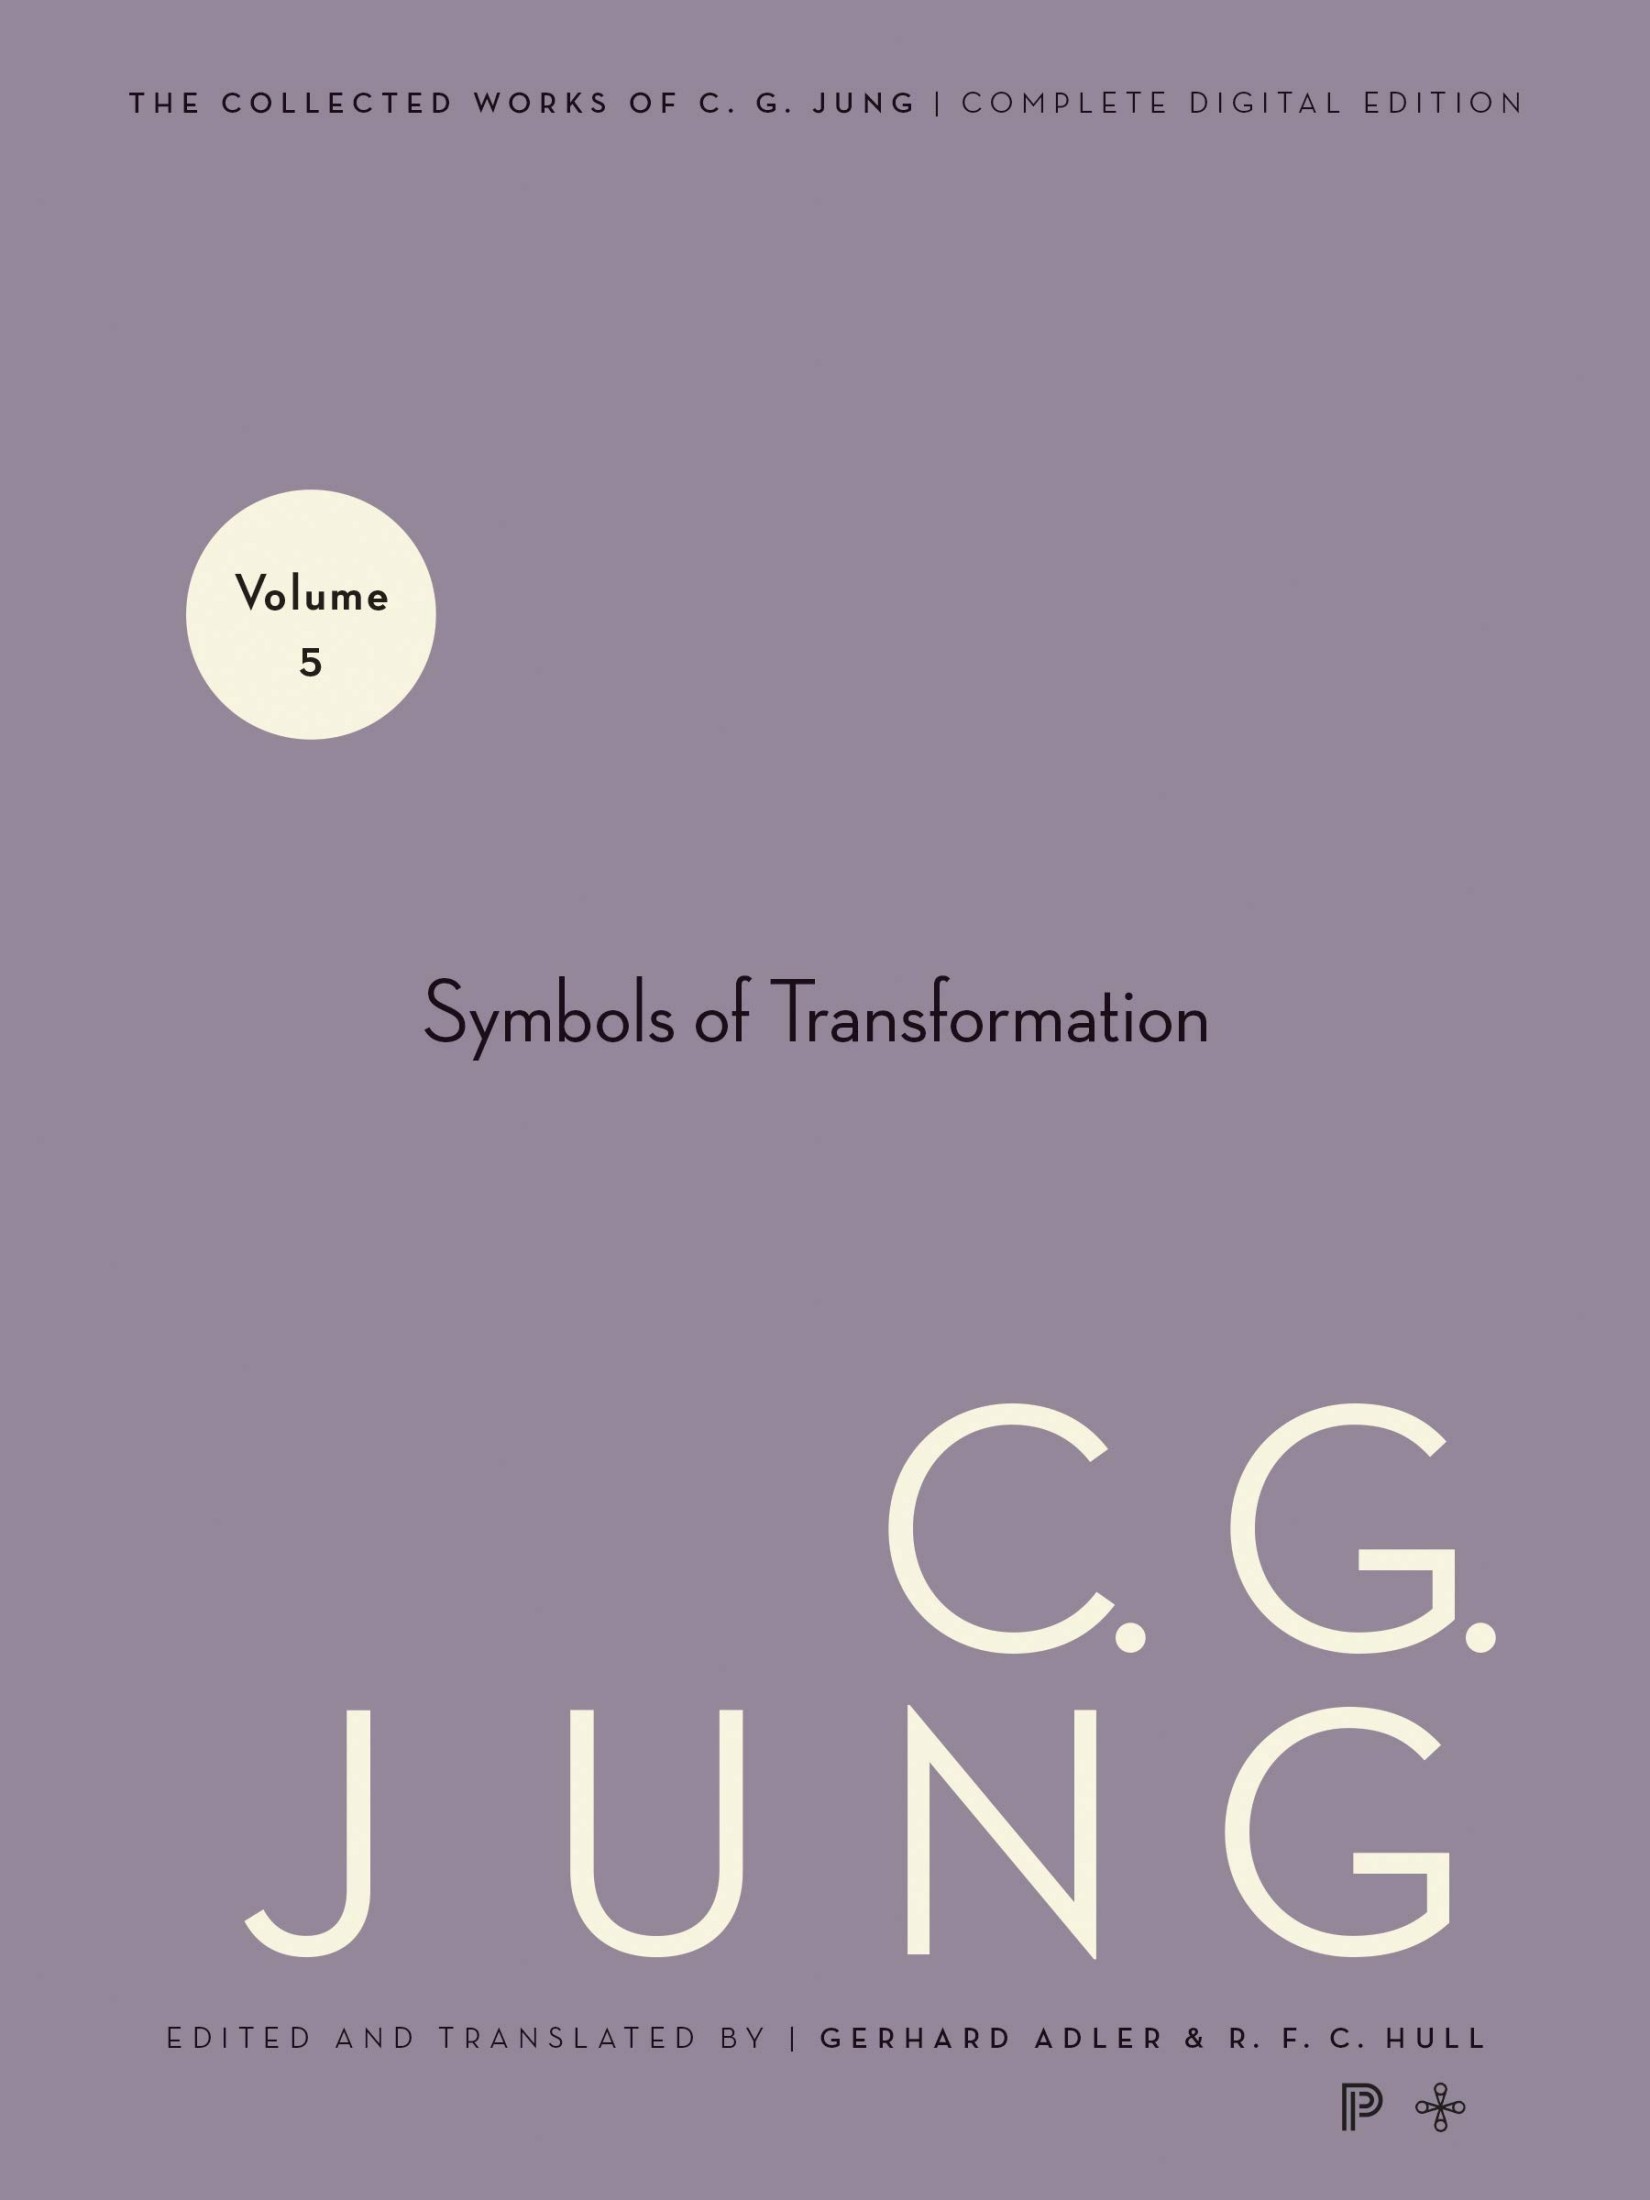 Symbols of Transformation: An Analysis of the Prelude to a Case of Schizophrenia